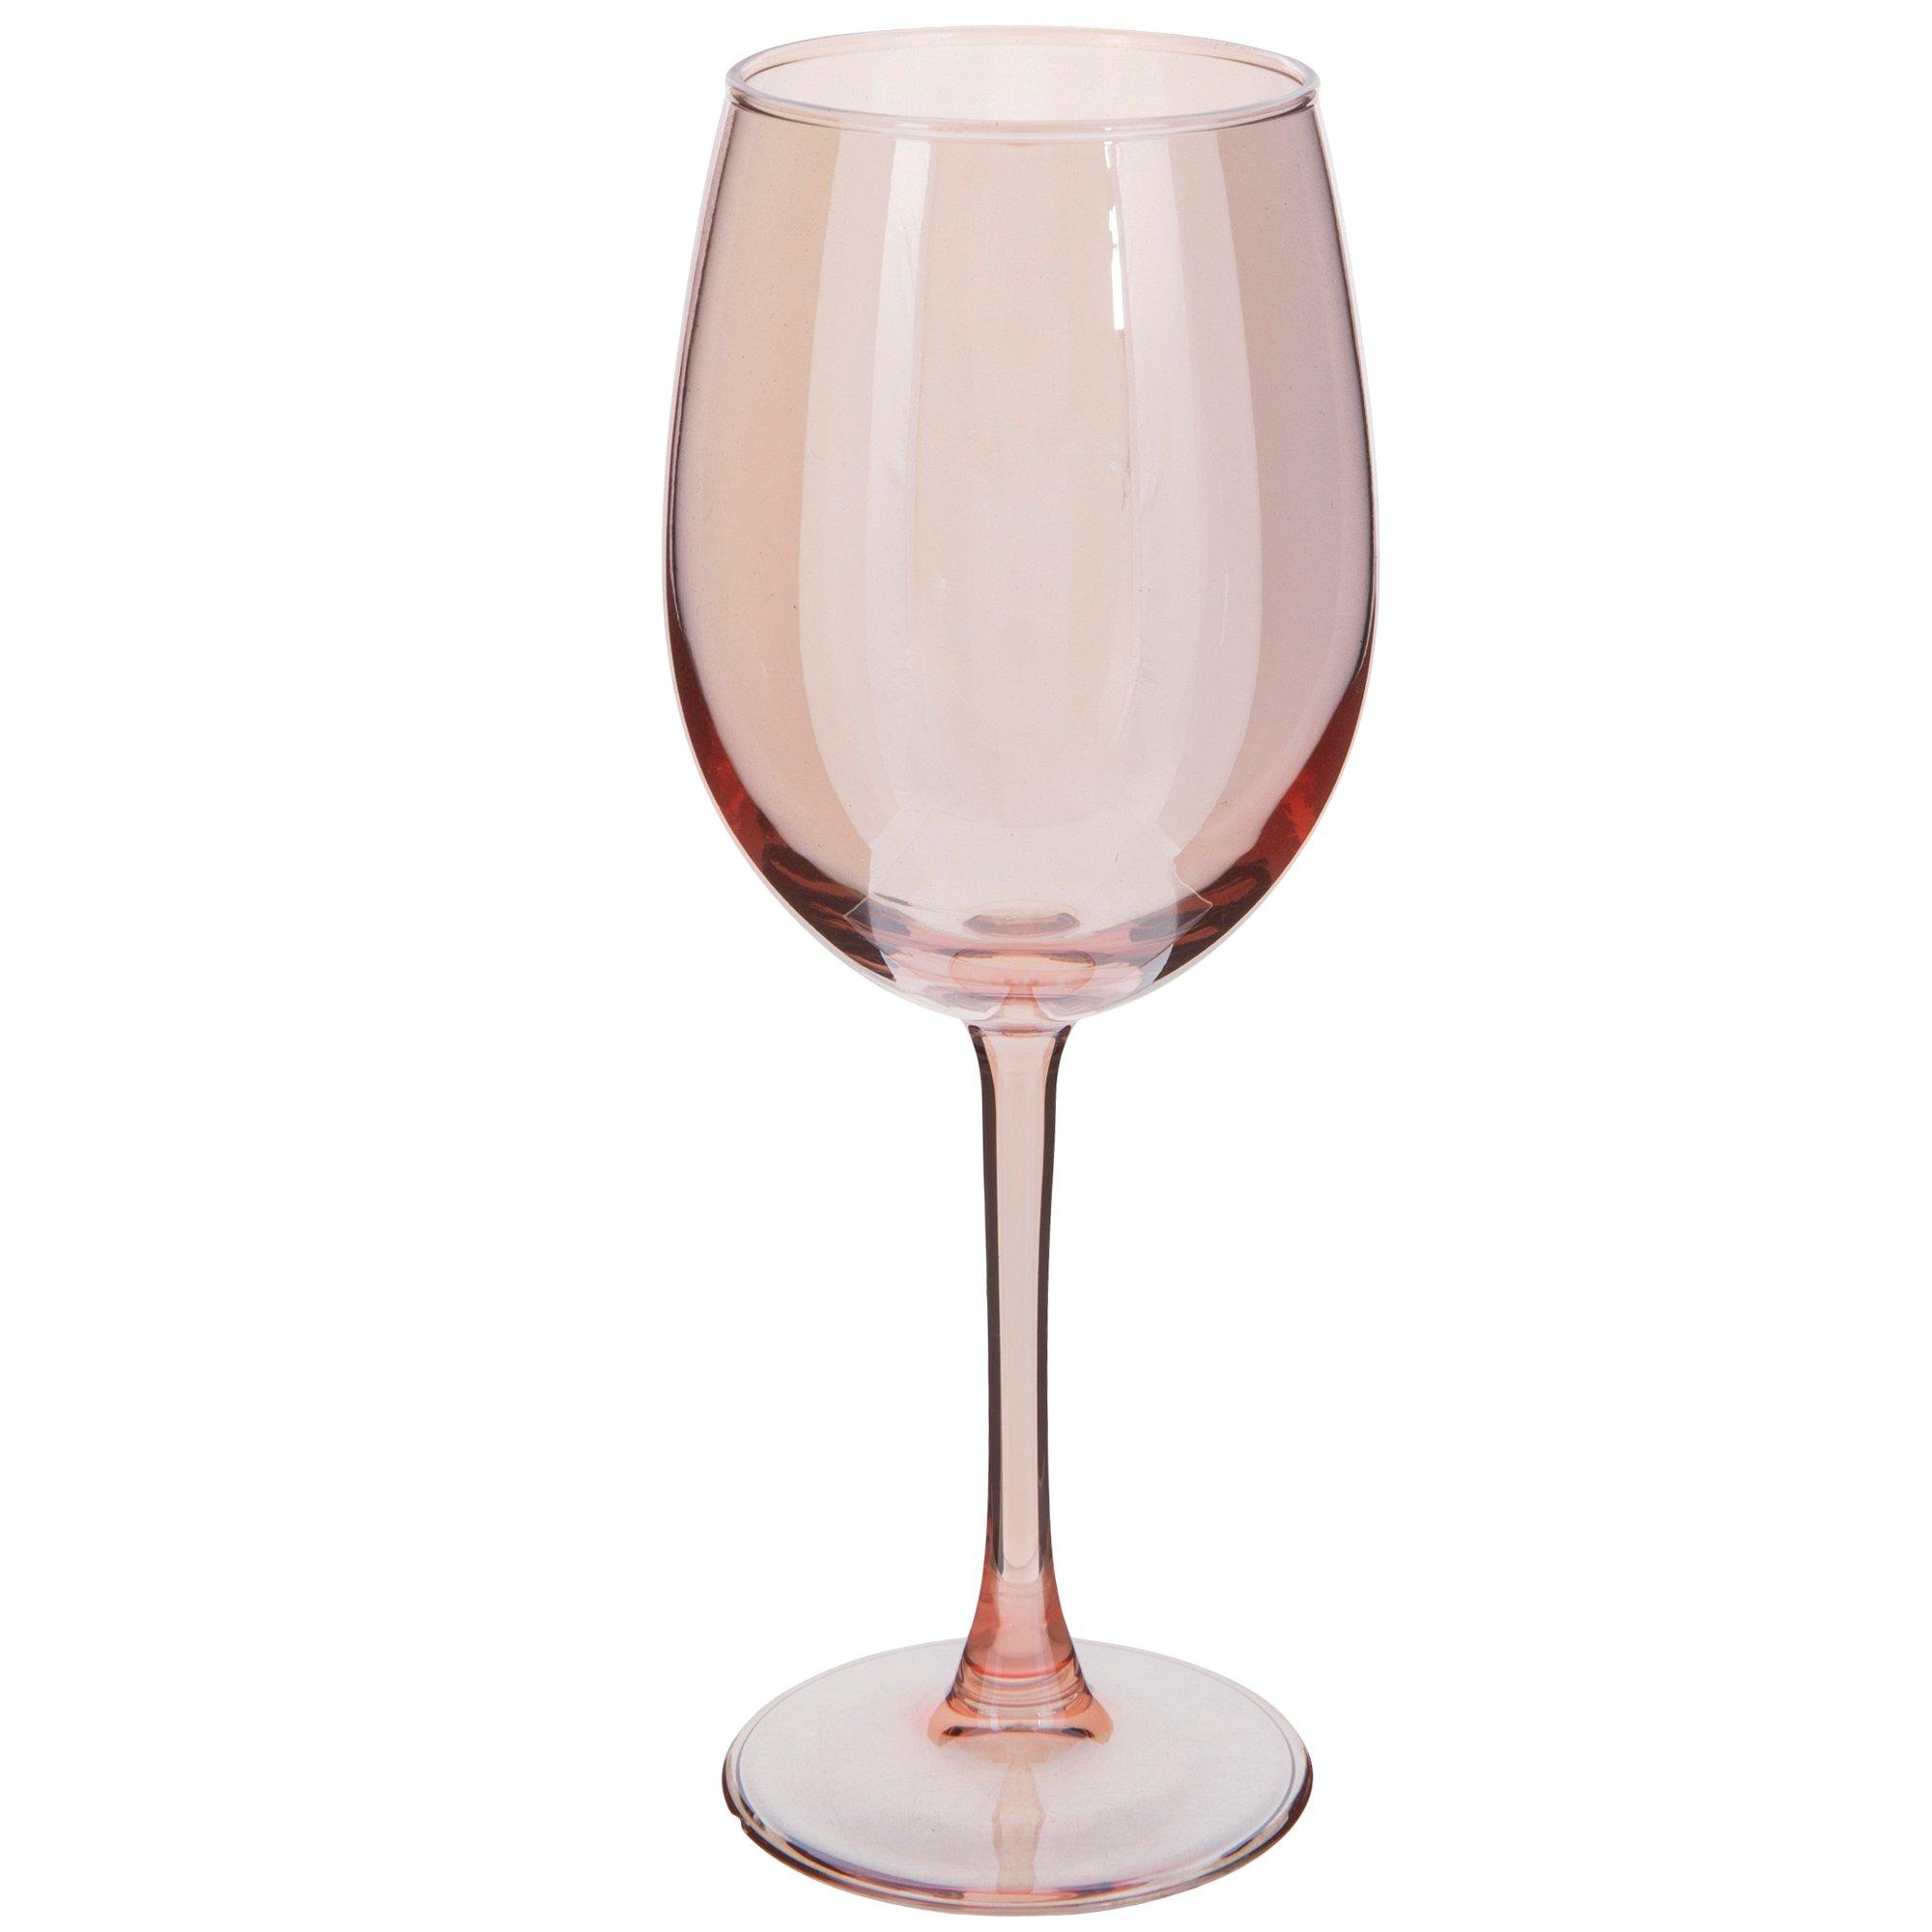 Pink wine glasses - stemless wineglasses finished with food safe epoxy resin